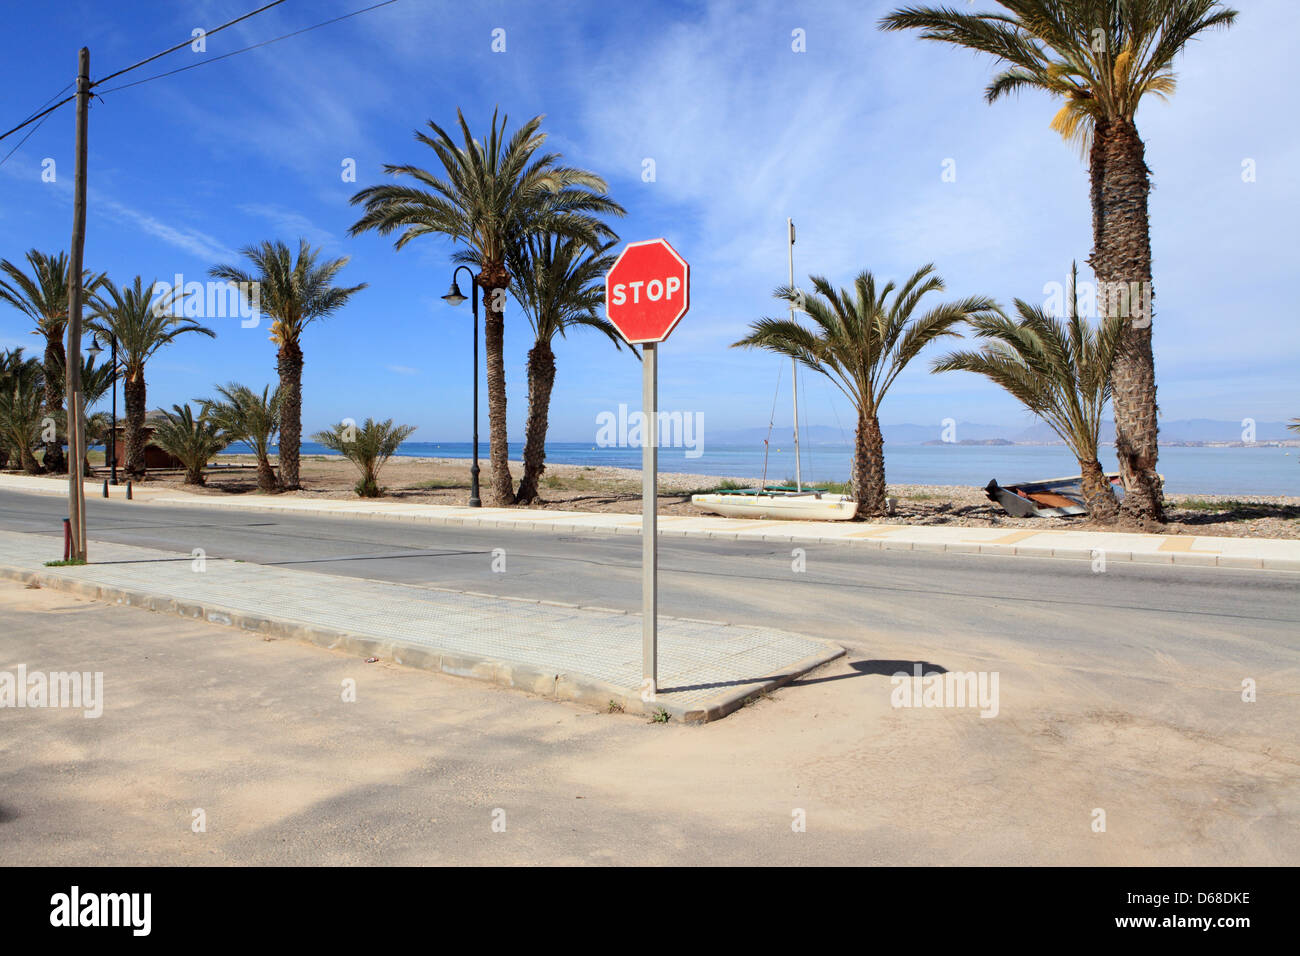 Stop sign, Southern Spain Stock Photo